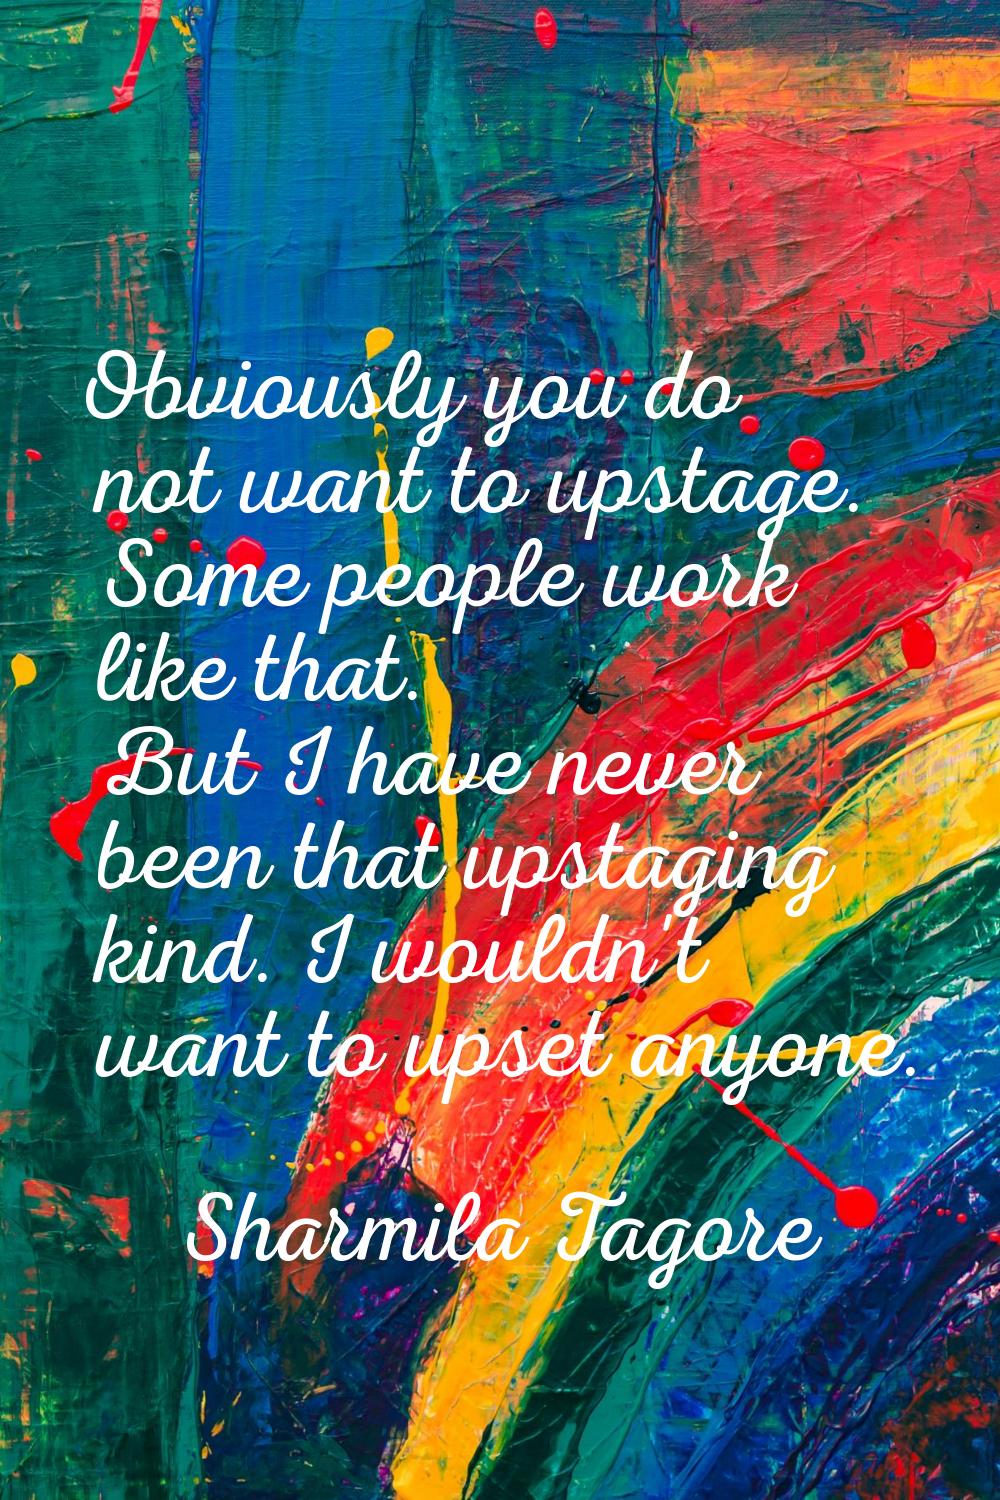 Obviously you do not want to upstage. Some people work like that. But I have never been that upstag